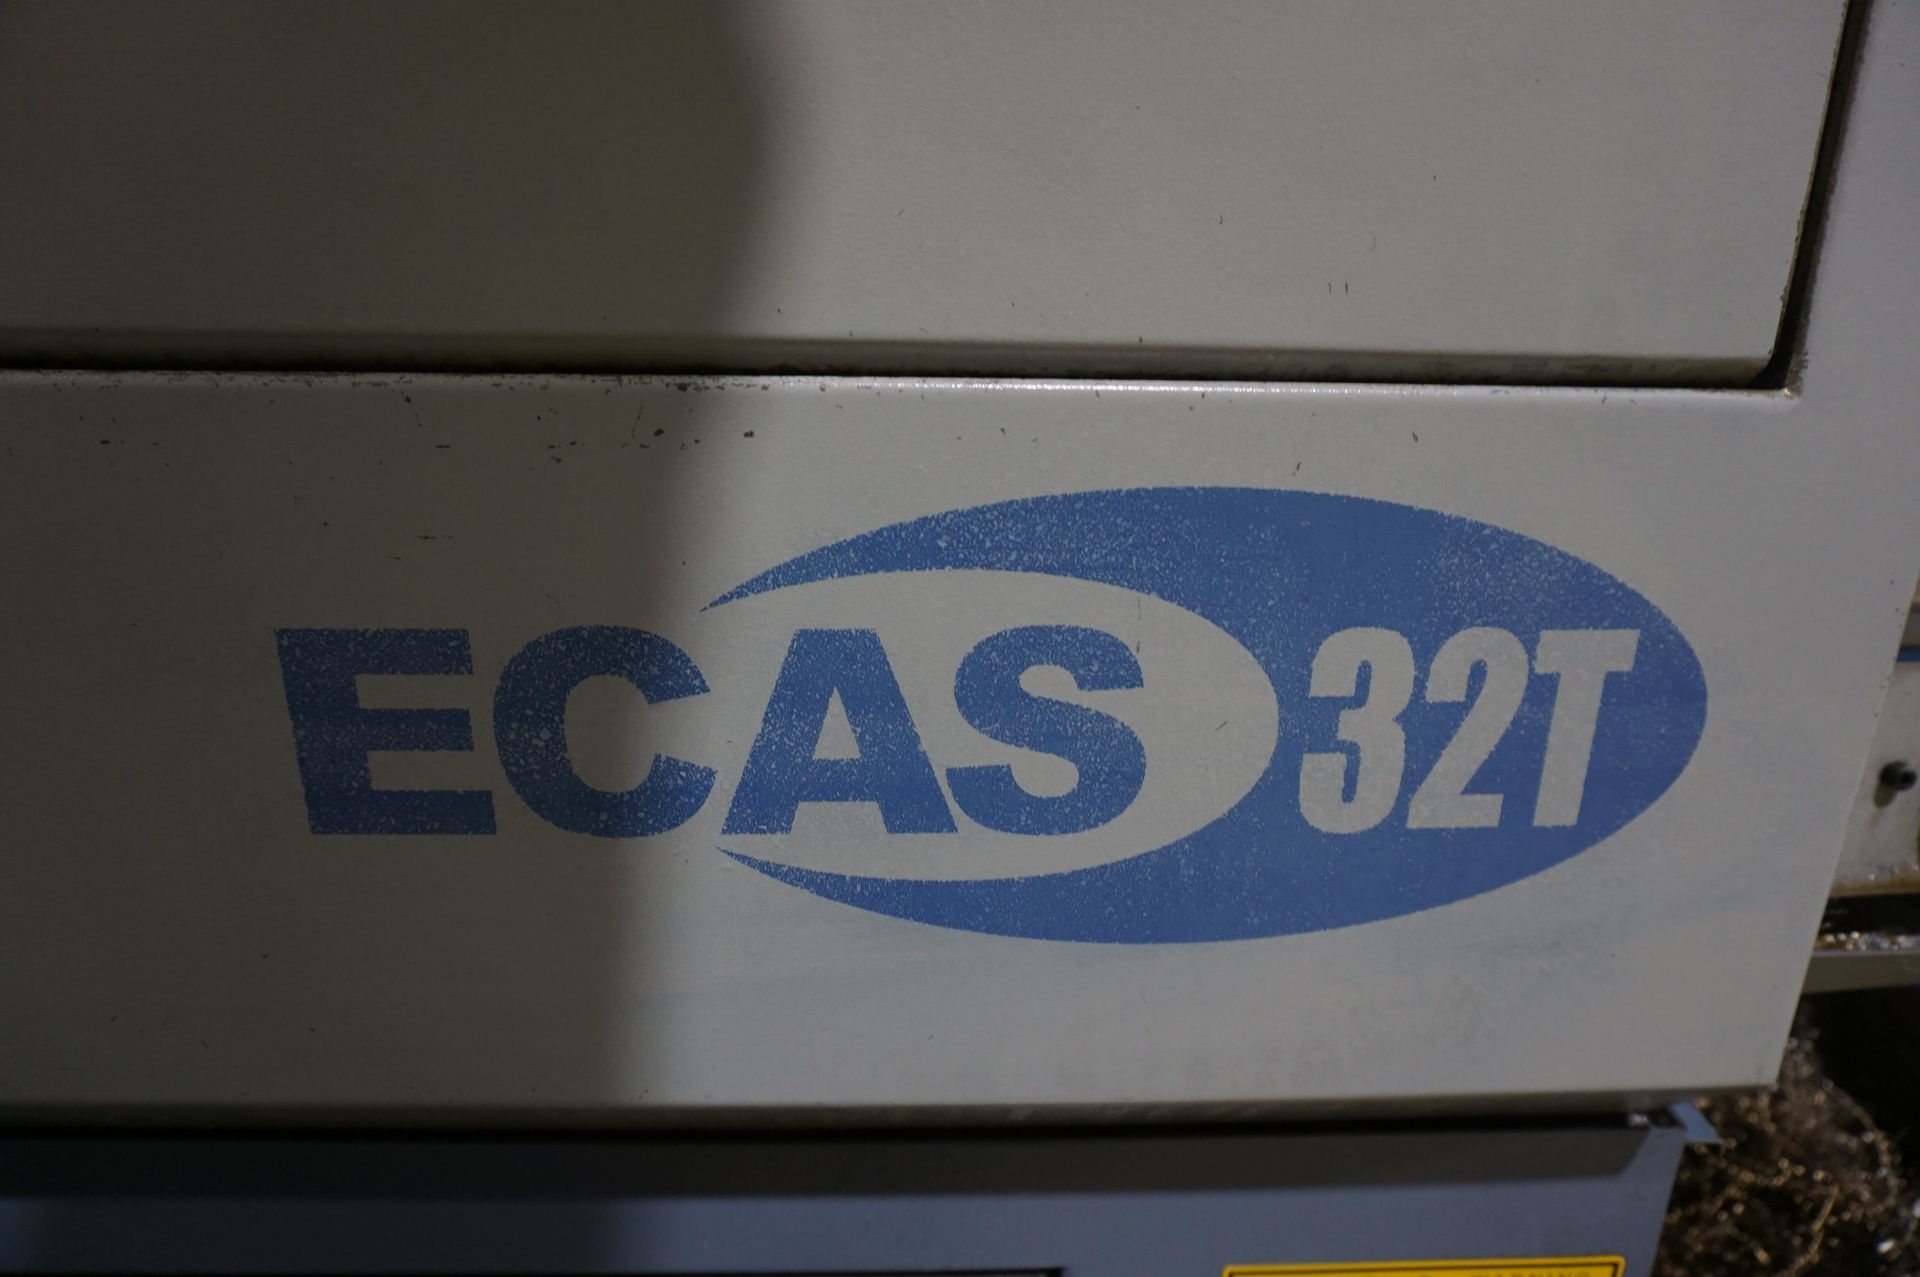 2005 STAR ECAS-32T MULTI AXIS AUTOMATIC SWISS LATHE, S/N 0113 (016), 11 AXIS, ONLY ~13,450 CUT - Image 9 of 24